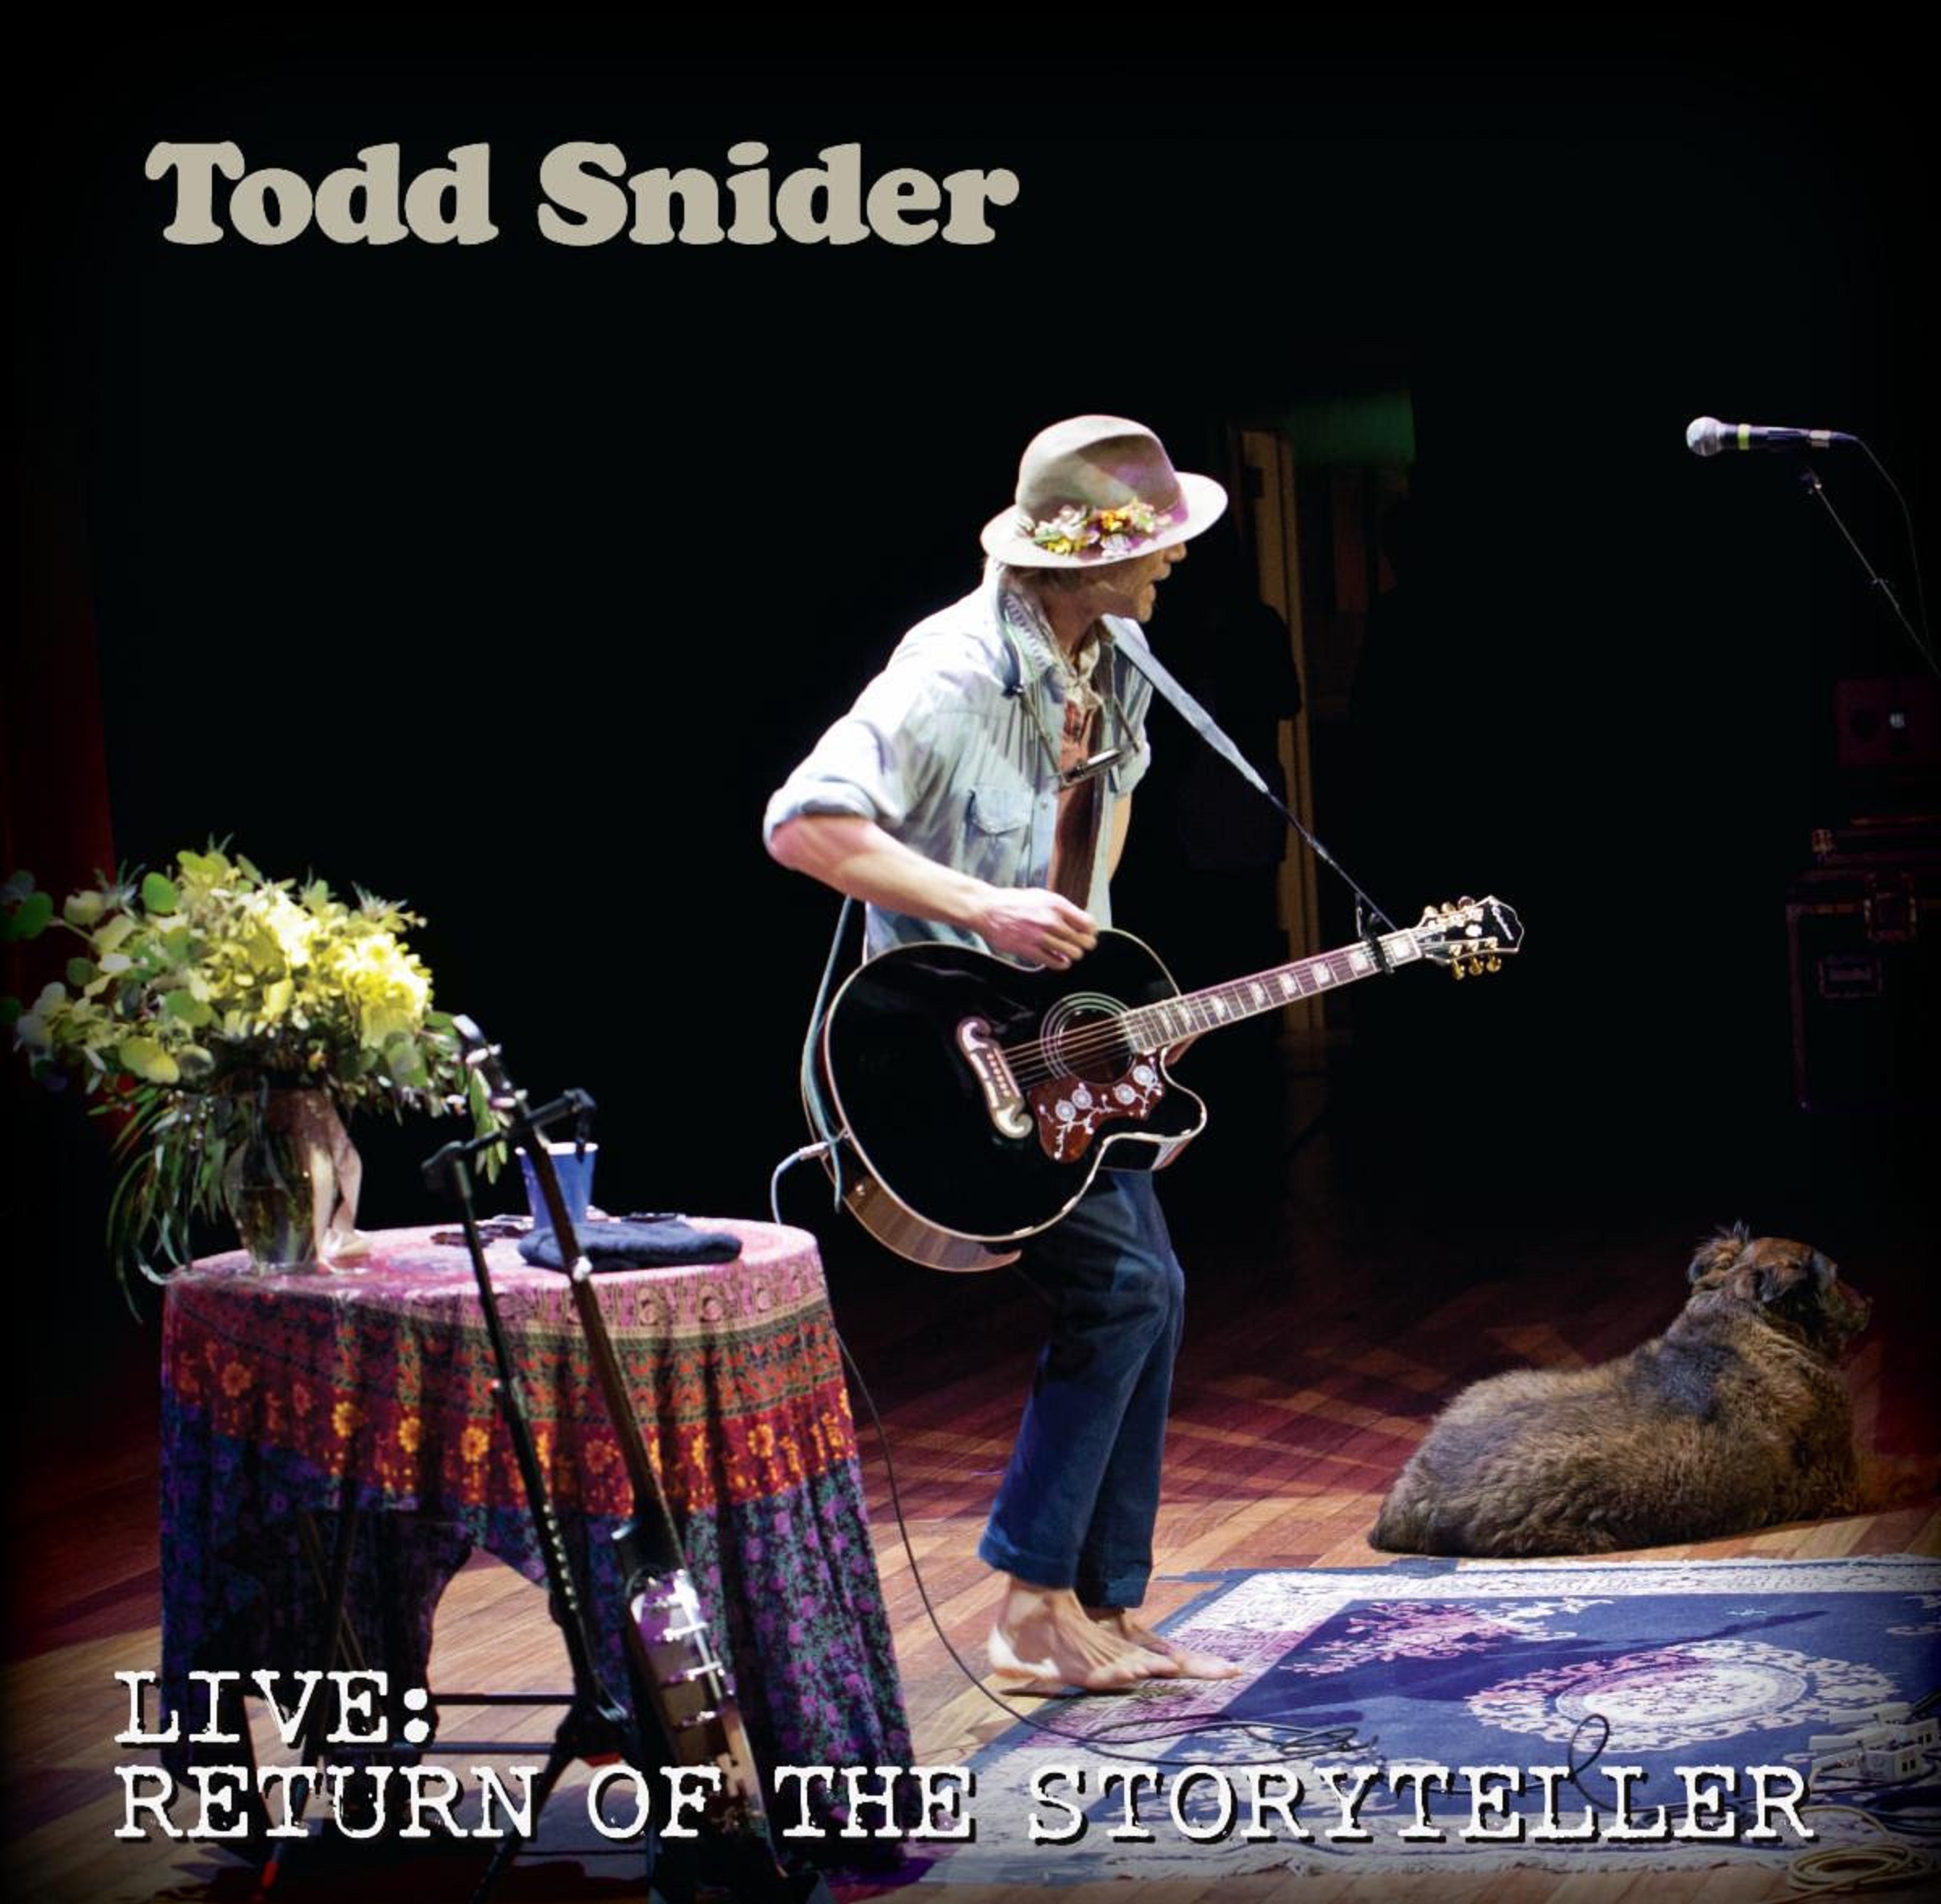 Todd Snider's new LP shares snapshots of first shows since pandemic + headlining historic Ryman 9/24